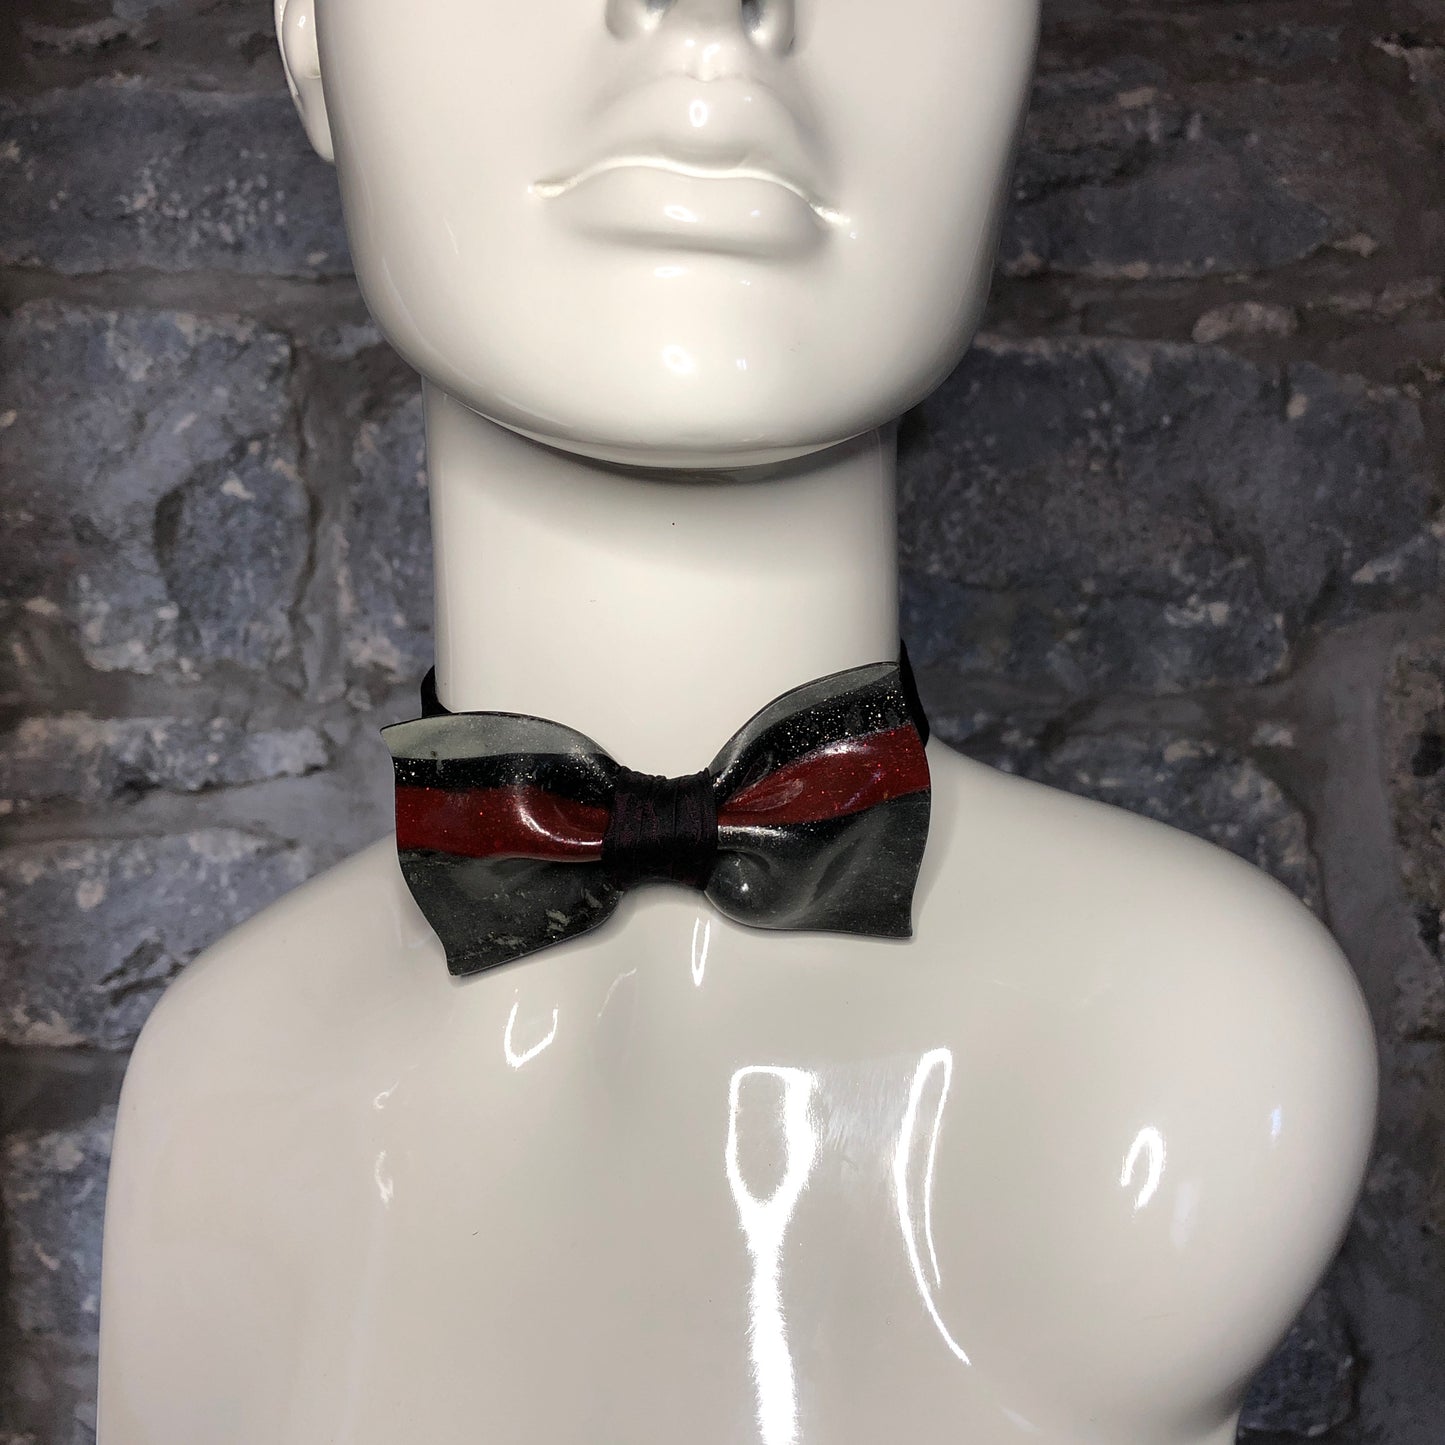 Edgar "Glo!" Collection Bow Tie